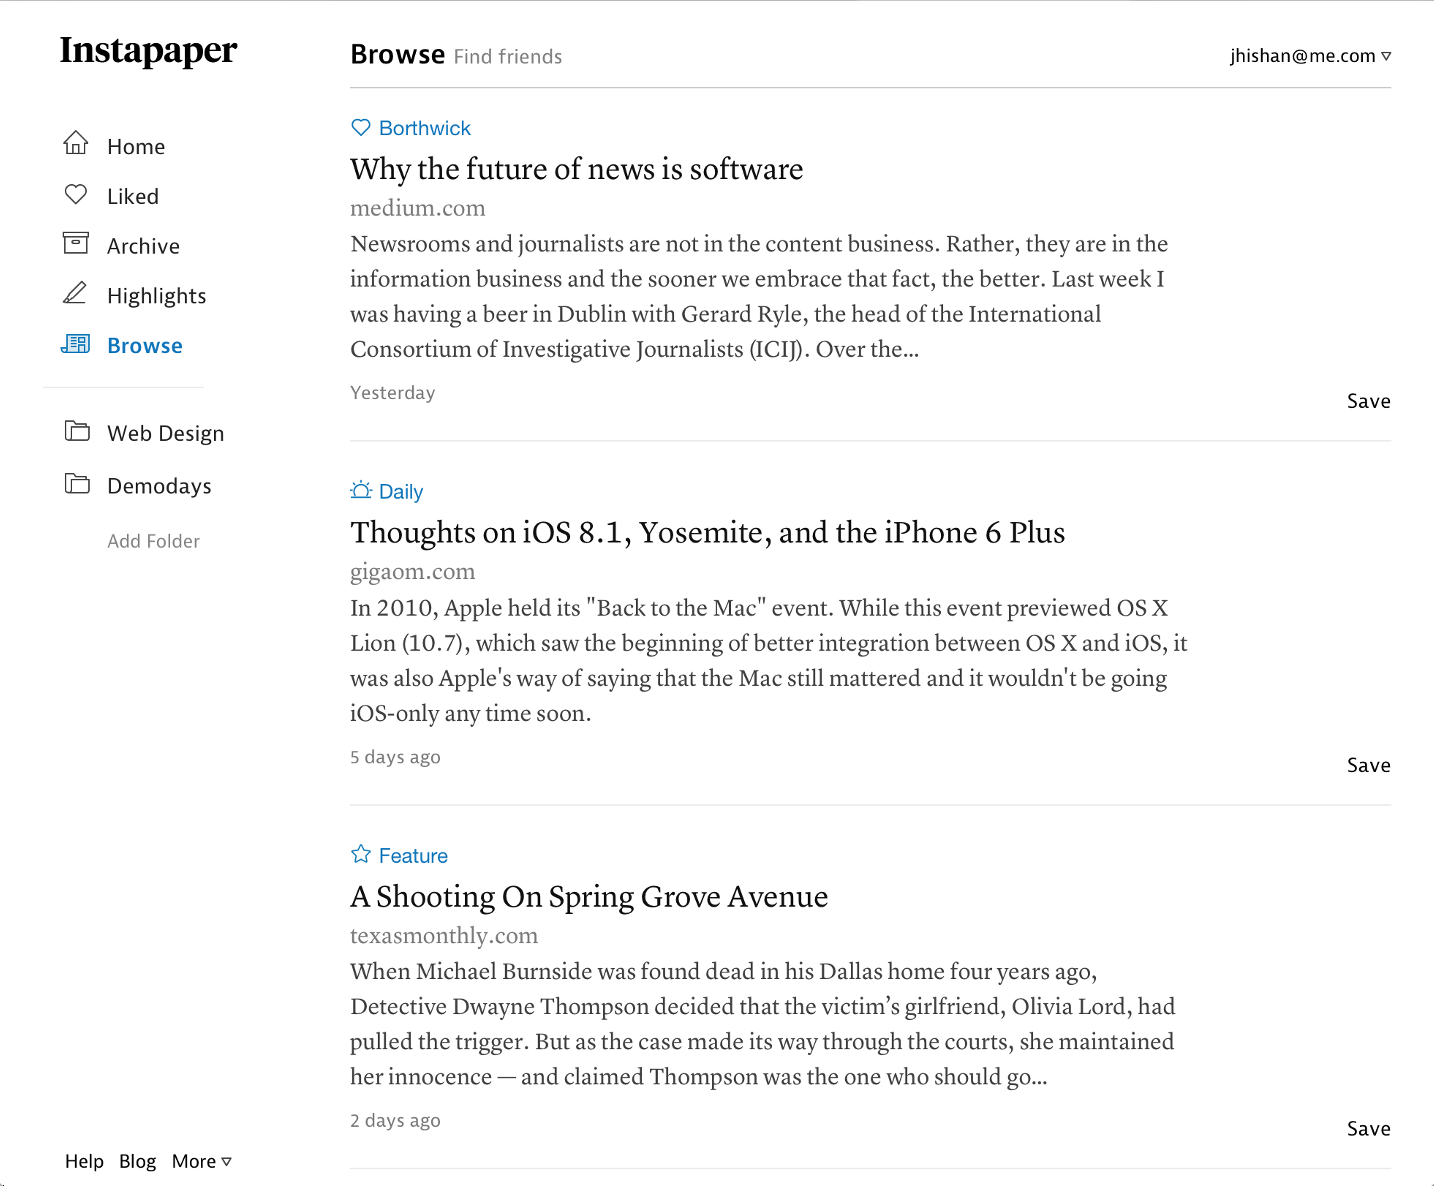 Browse section @ Instapaper